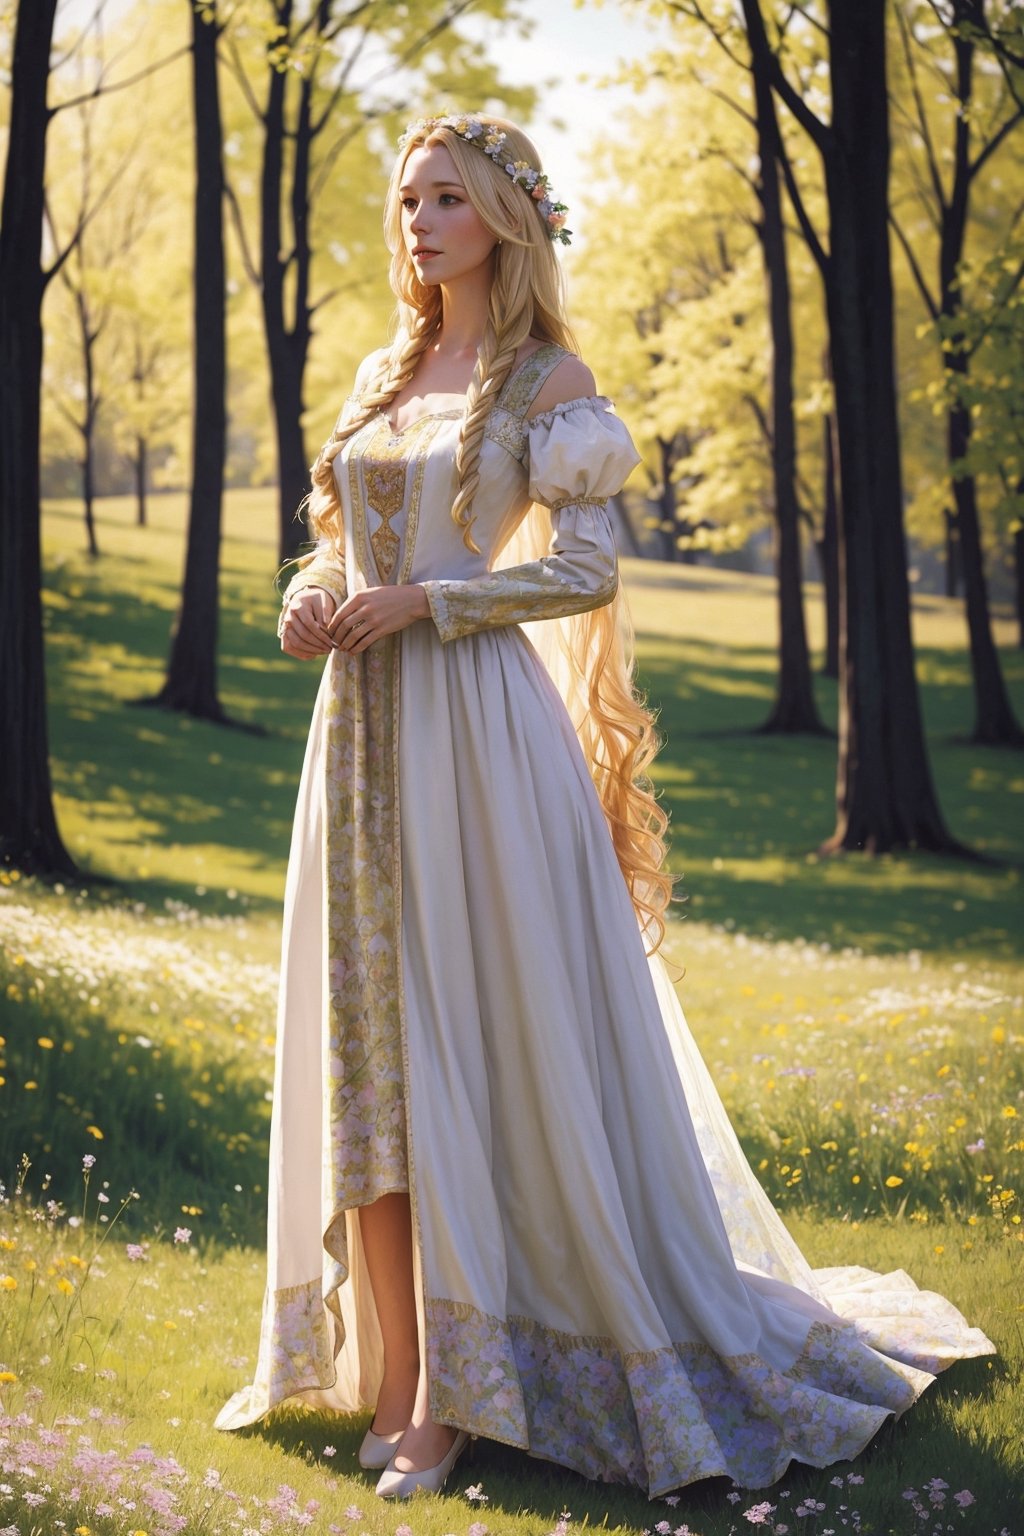 Portrait of a 25-year-old girl with long blonde hair, dressed in a dress made of light material, standing in a meadow among flowers, Low-Angle Shot,
Brome art, image of an epic fantasy character, portrait of a character, fantasy art, works by Richard Schmid, A.Mucha, Volegov, Impressionism